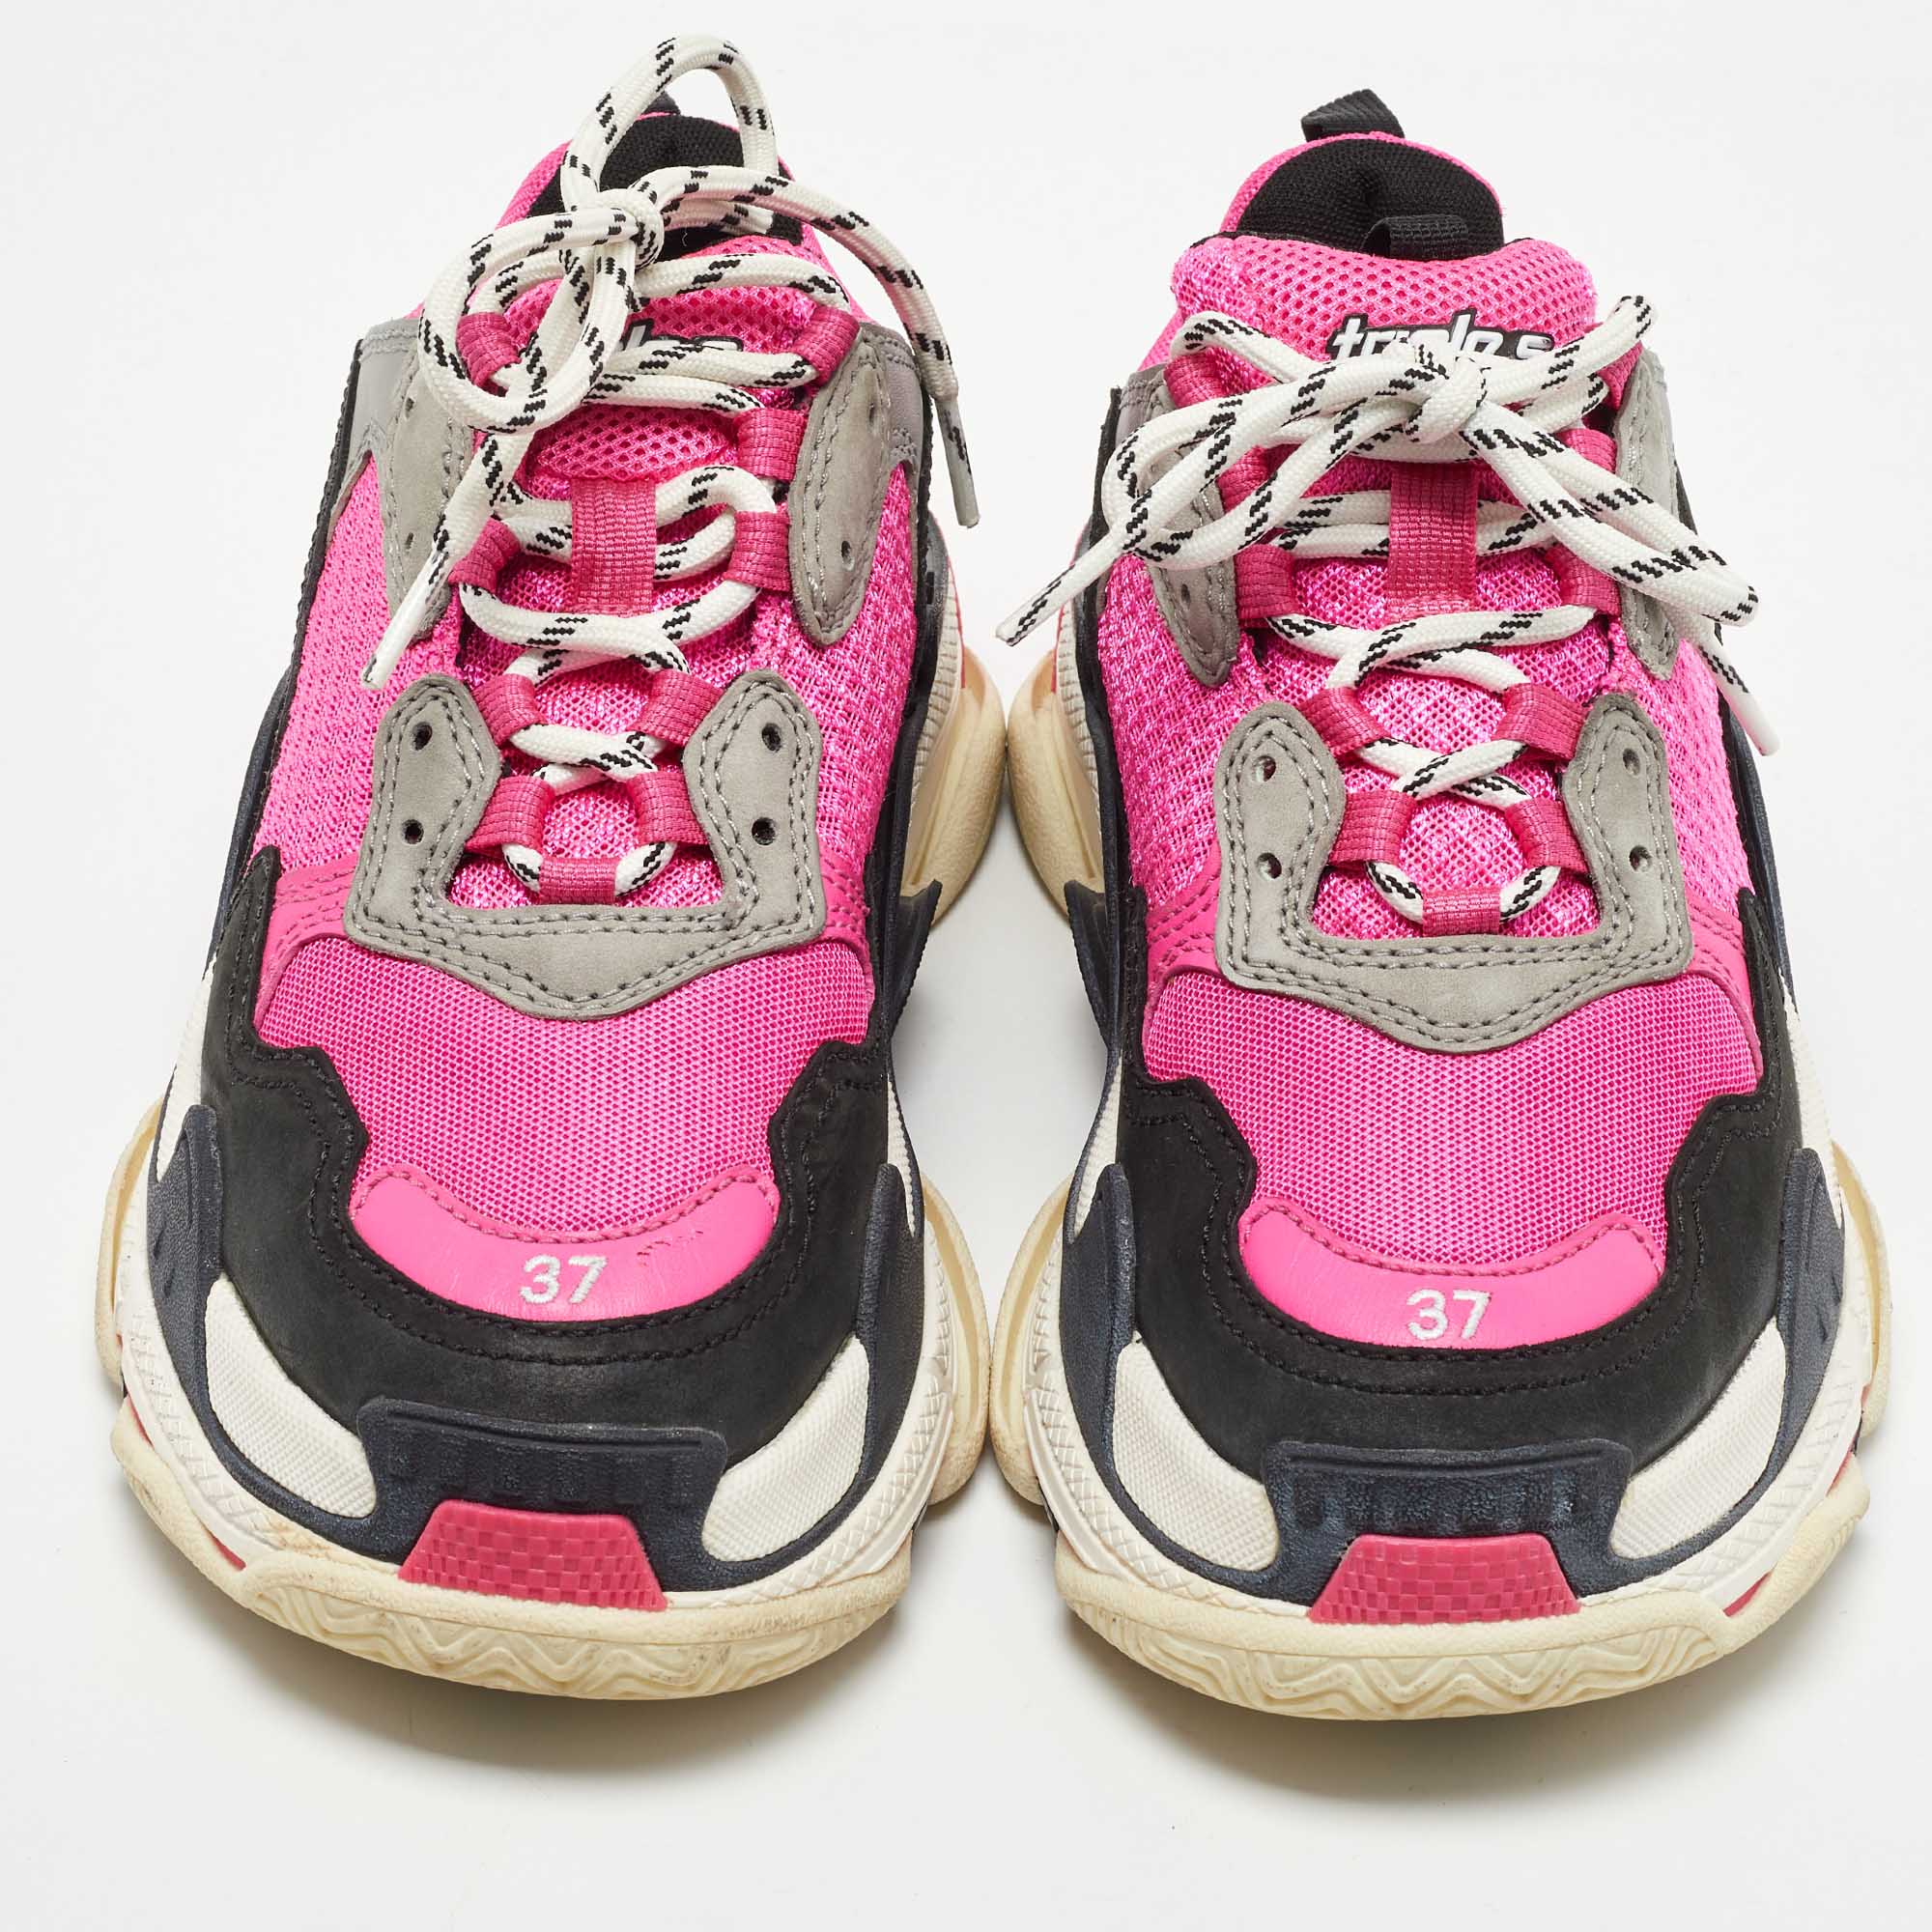 Balenciaga Pink/Black Mesh And Leather Triple S Sneakers Size 37